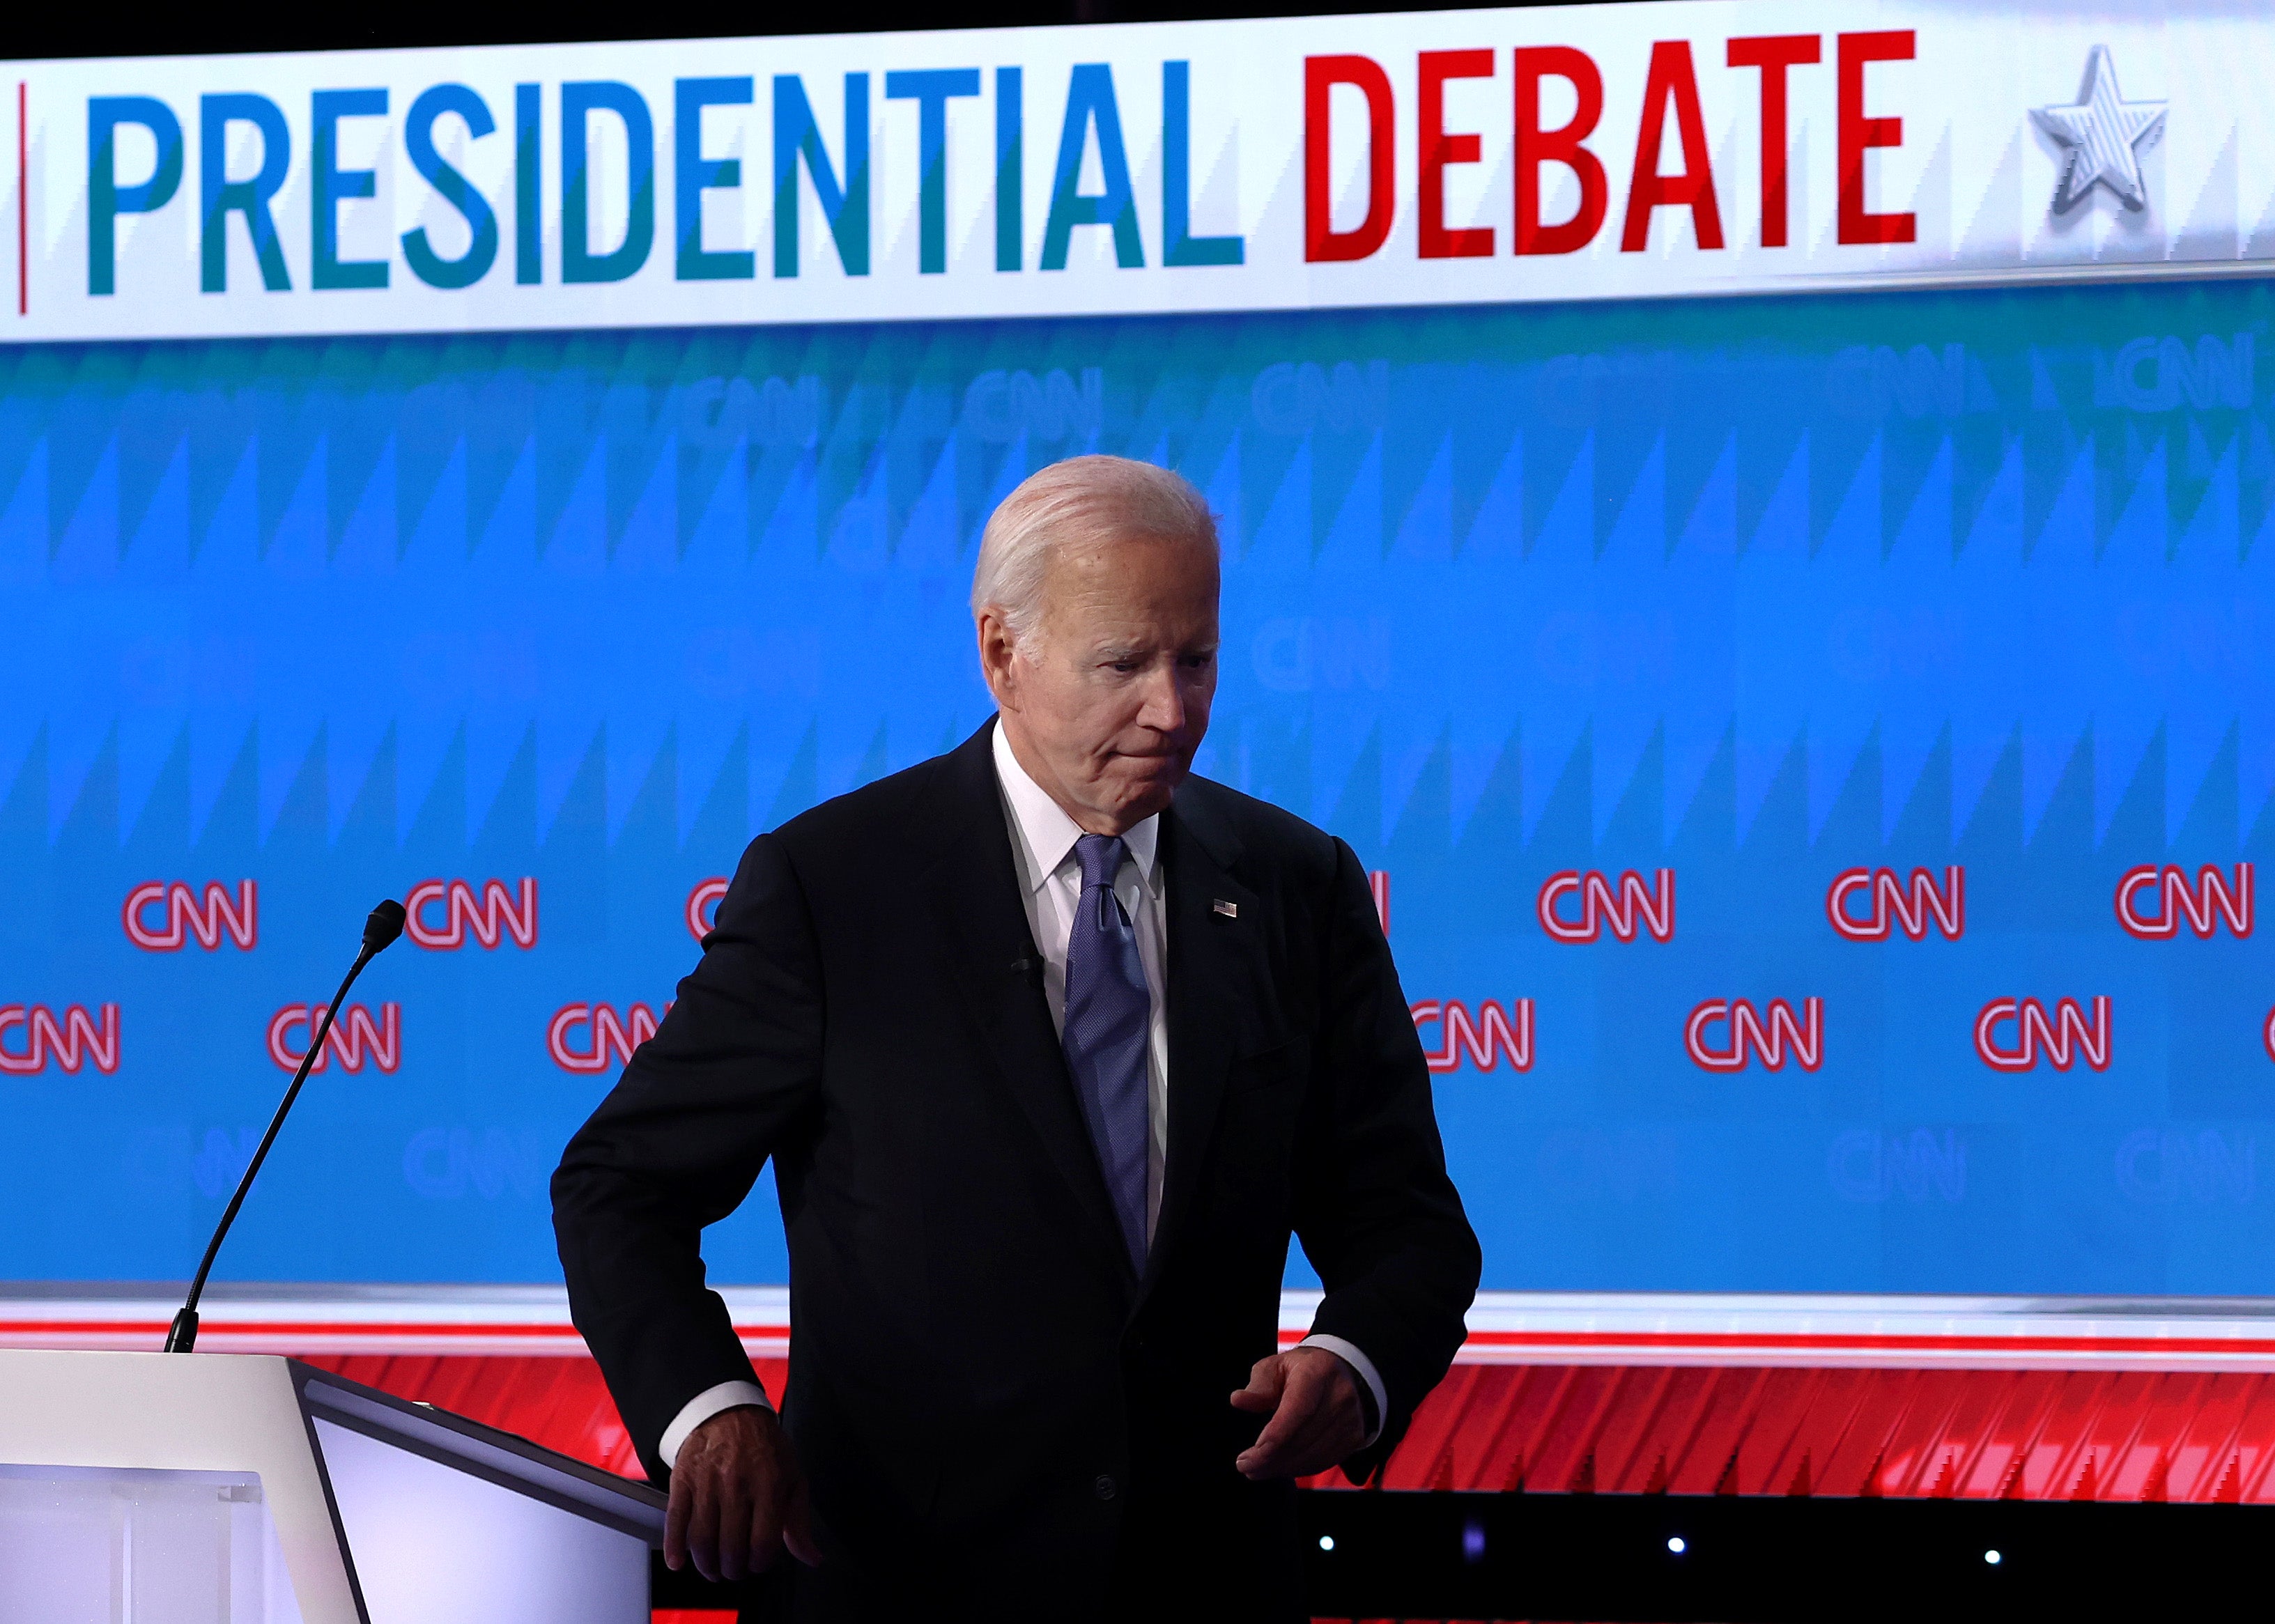 Even Biden’s friends were questioning on if he should continue the campaign after his disastrous debate showing